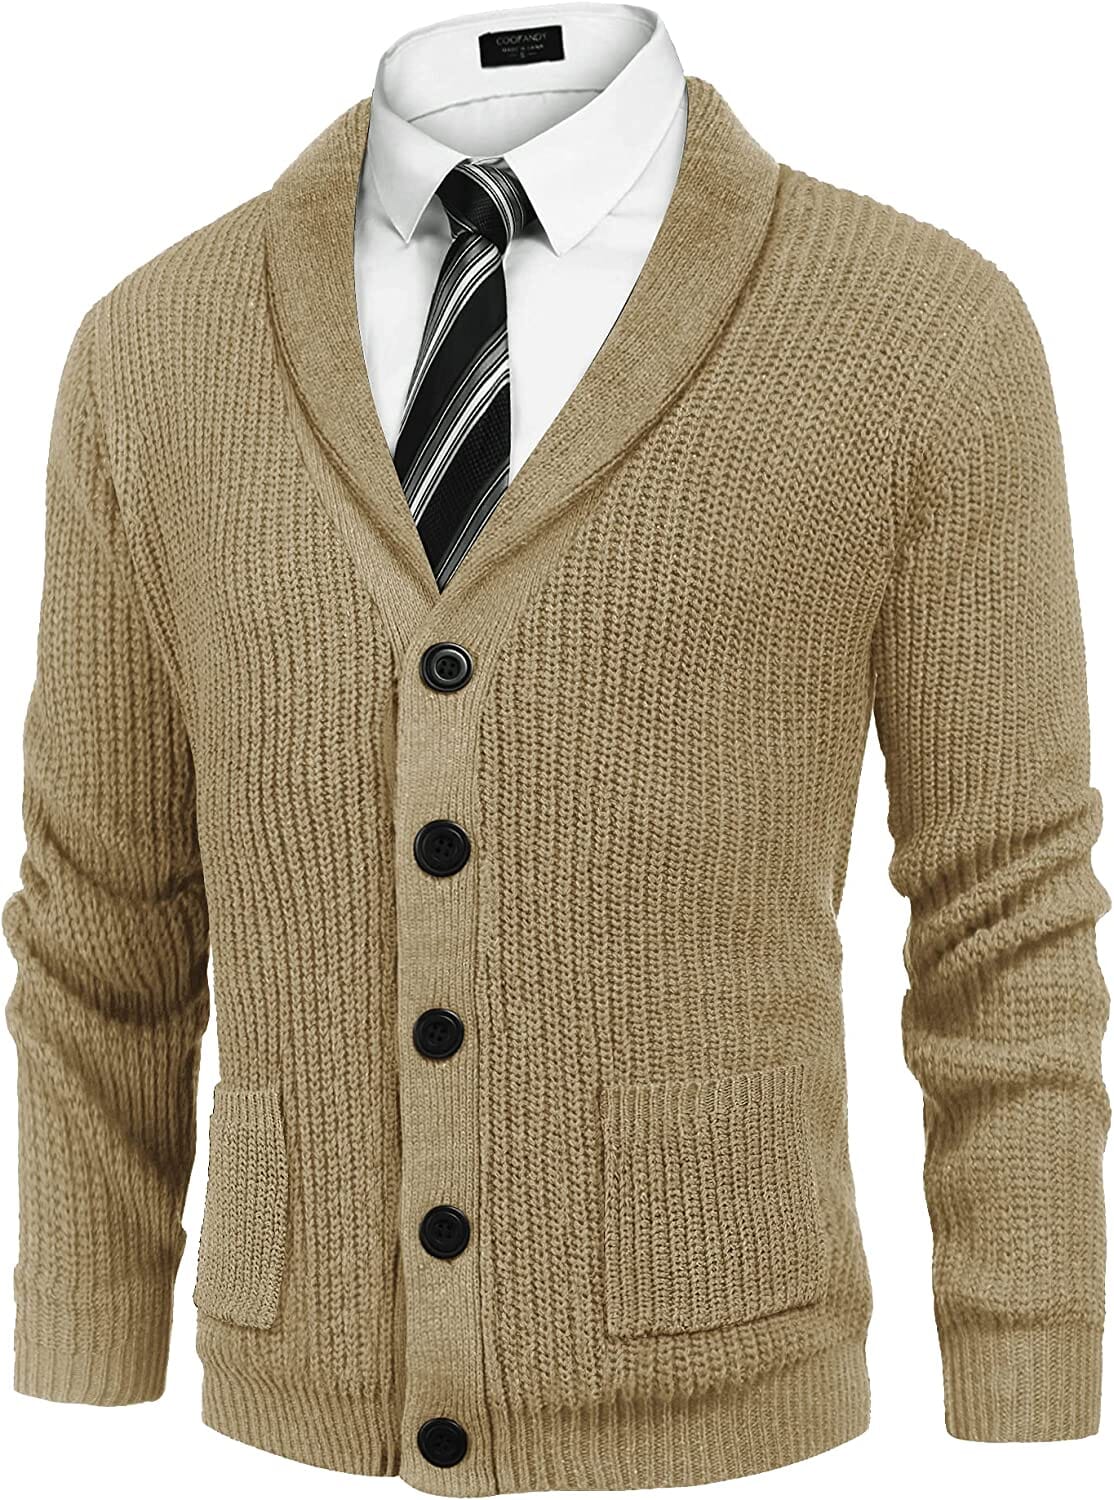 Lapel Button Up Cable Knit Cardigan with Pockets (US Only) Cardigans COOFANDY Store Dark Khaki S 